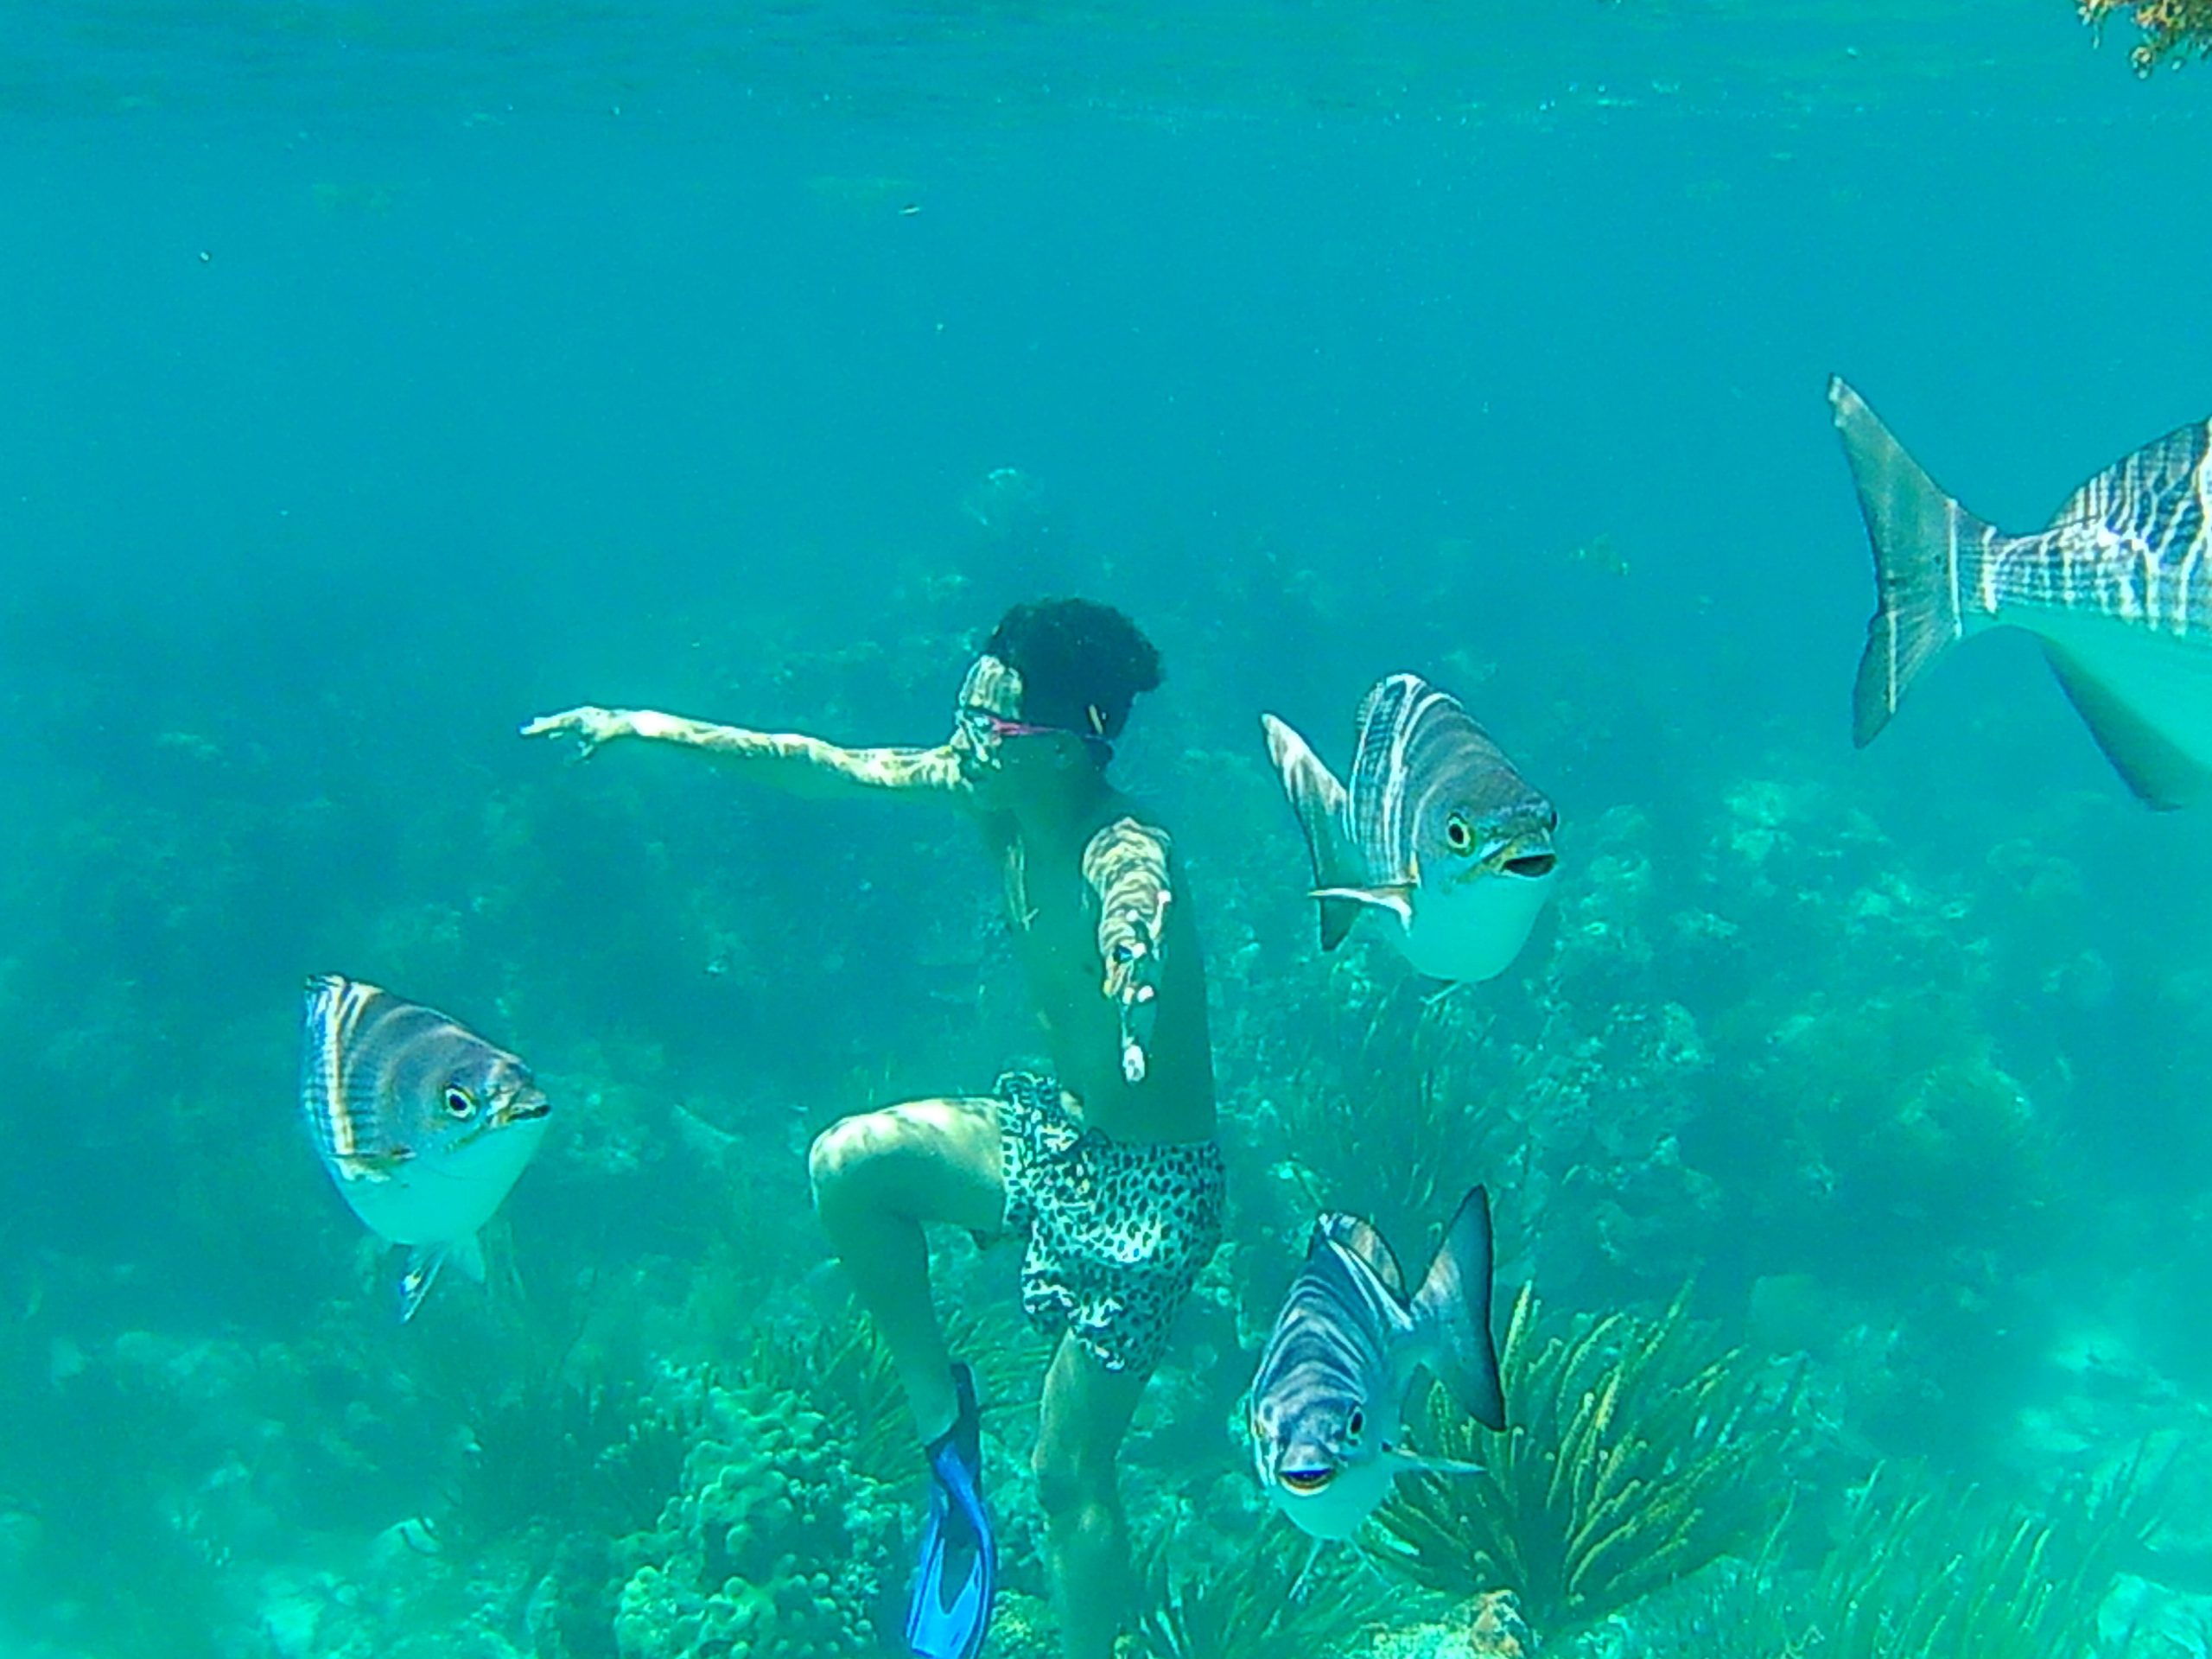 swimmer deep under water surrounded by fish and coral reef